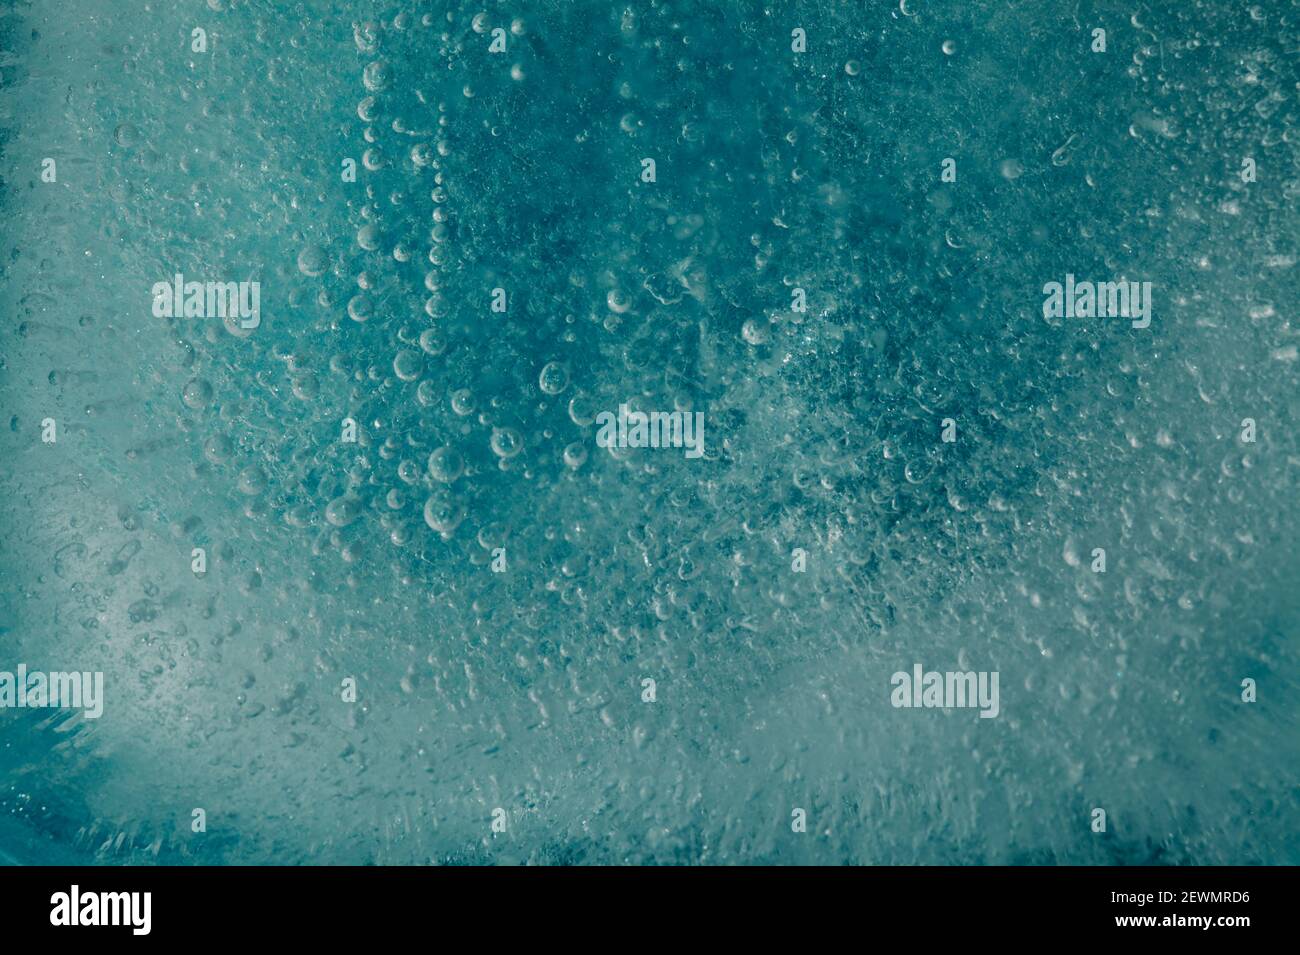 Iced texture with separate small round air bubbles trapped inside Stock ...